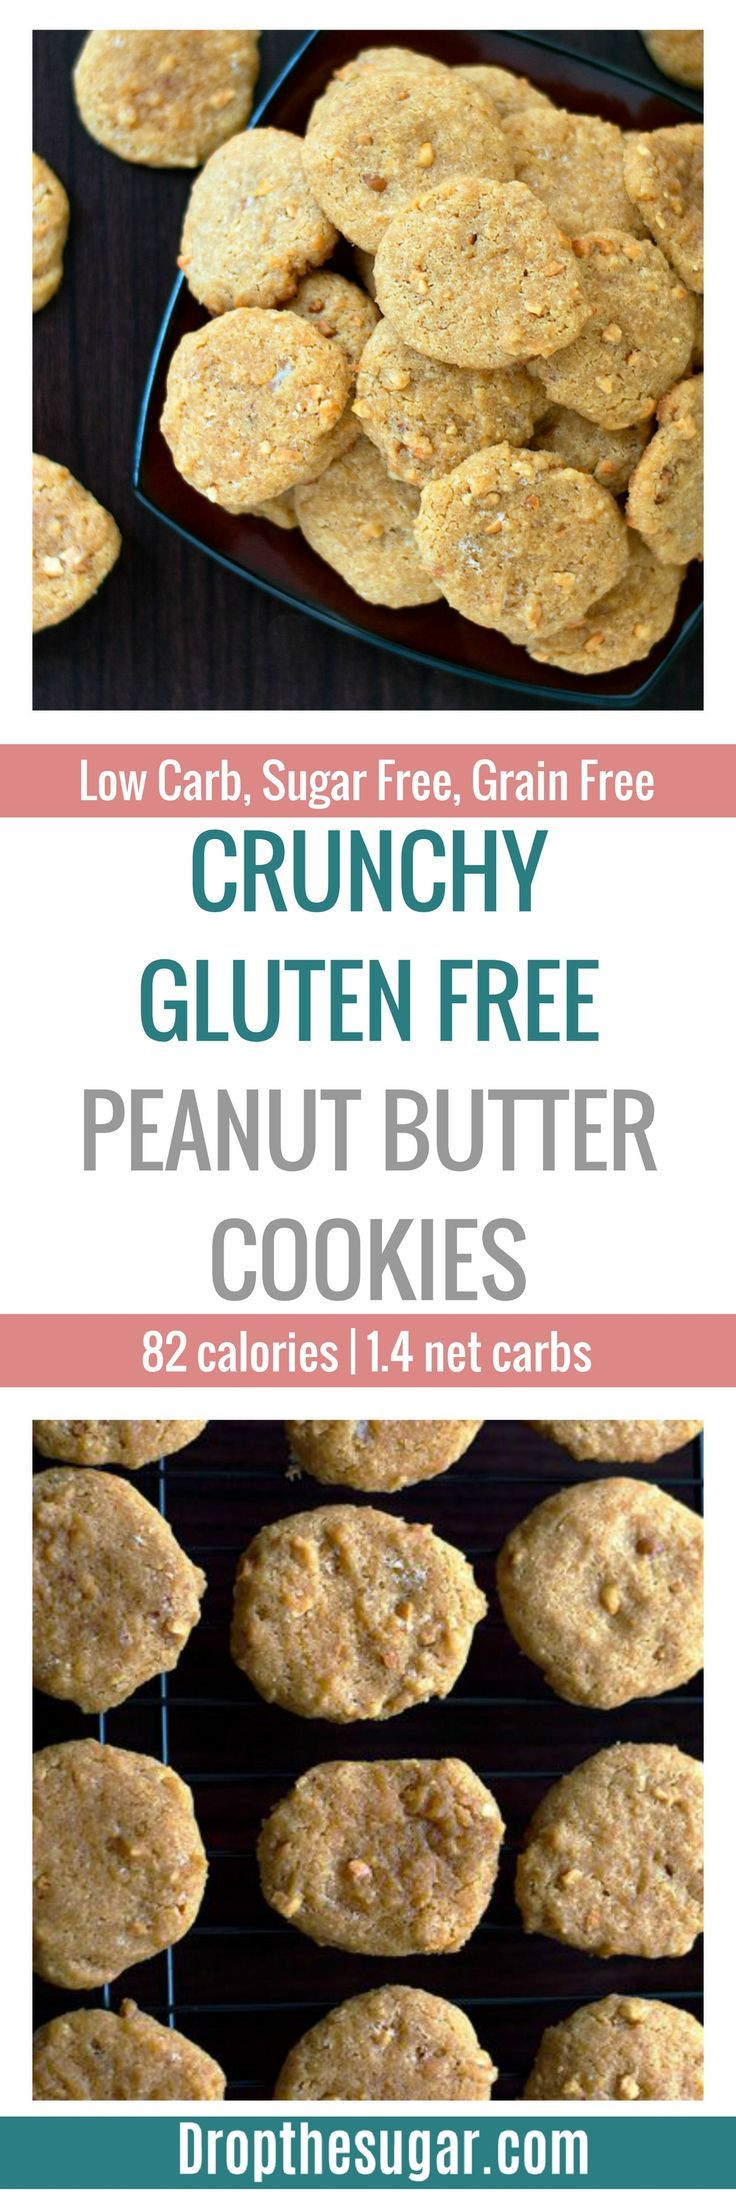 Low Carb Cookie Recipes
 17 Best images about Low Carb Cookie Recipes on Pinterest